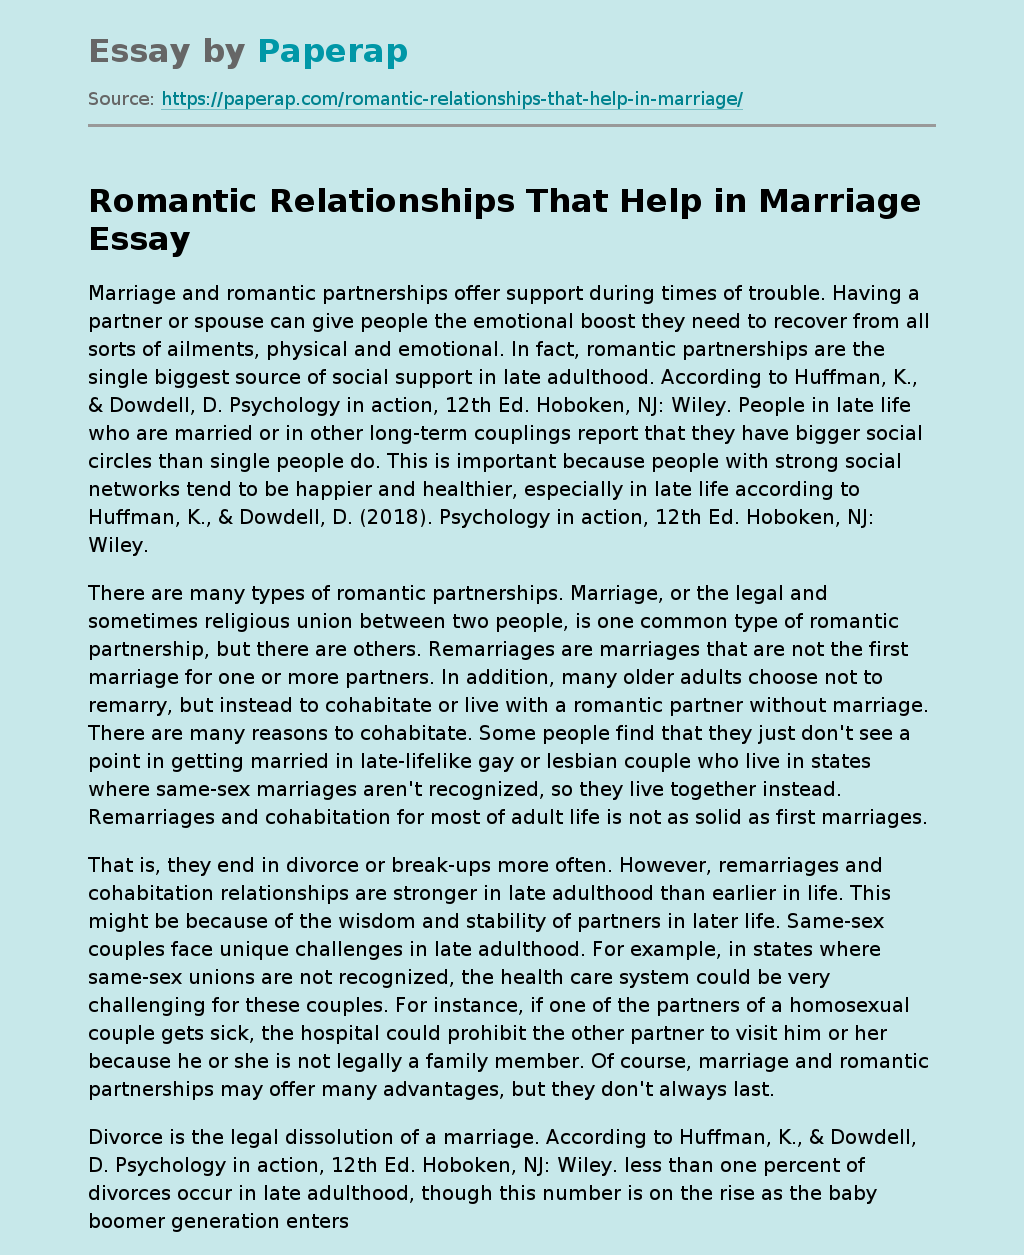 Romantic Relationships That Help in Marriage